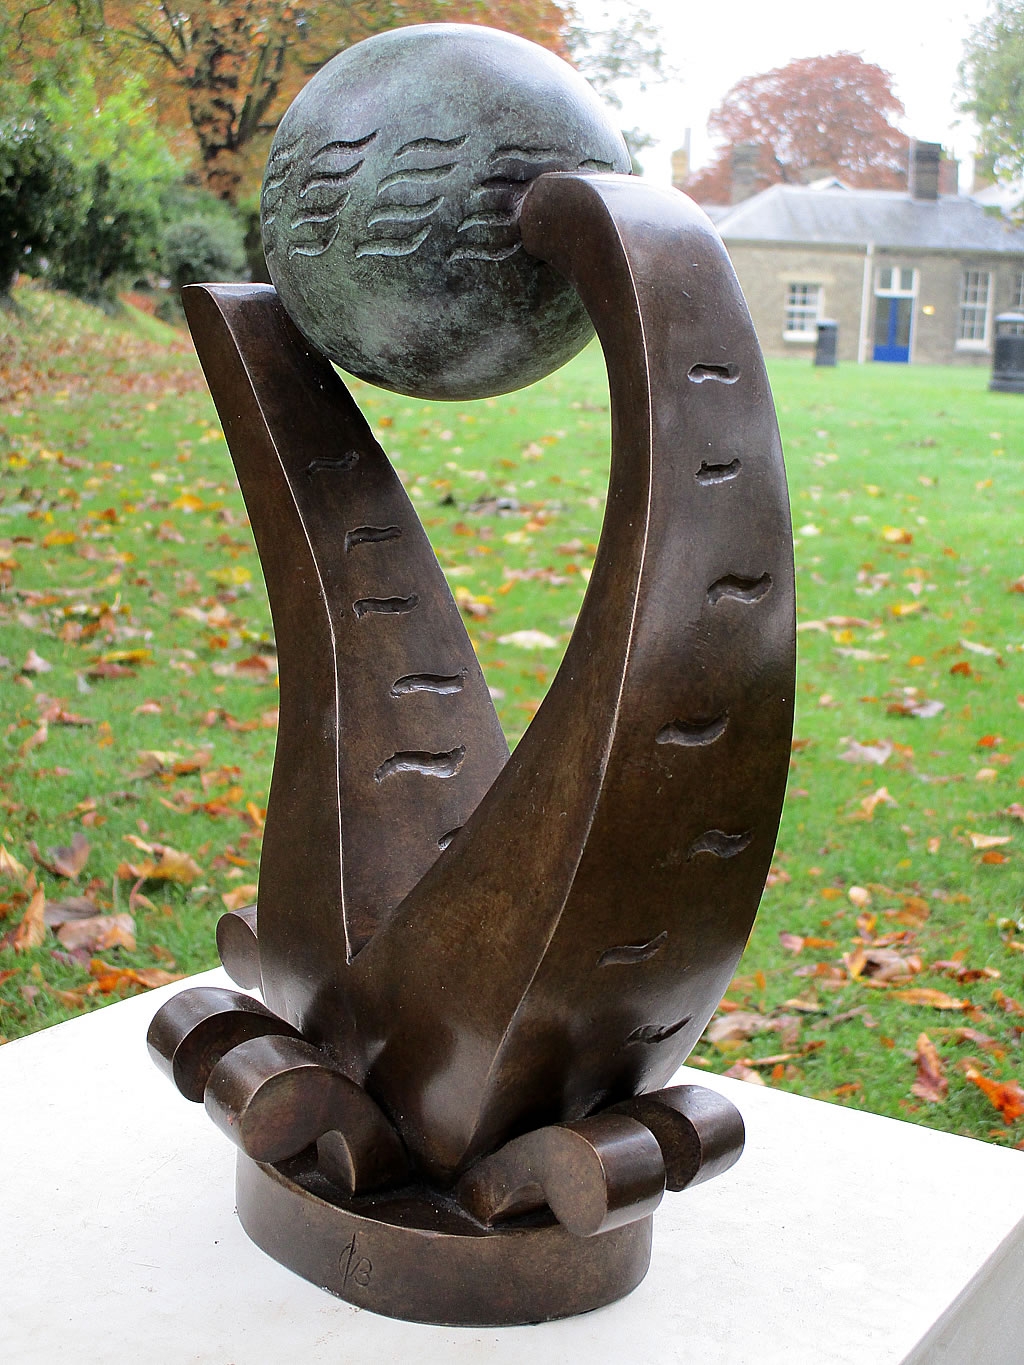 IOPC Funds Trophies (abstract sculpture) by sculptor Ian Campbell-Briggs